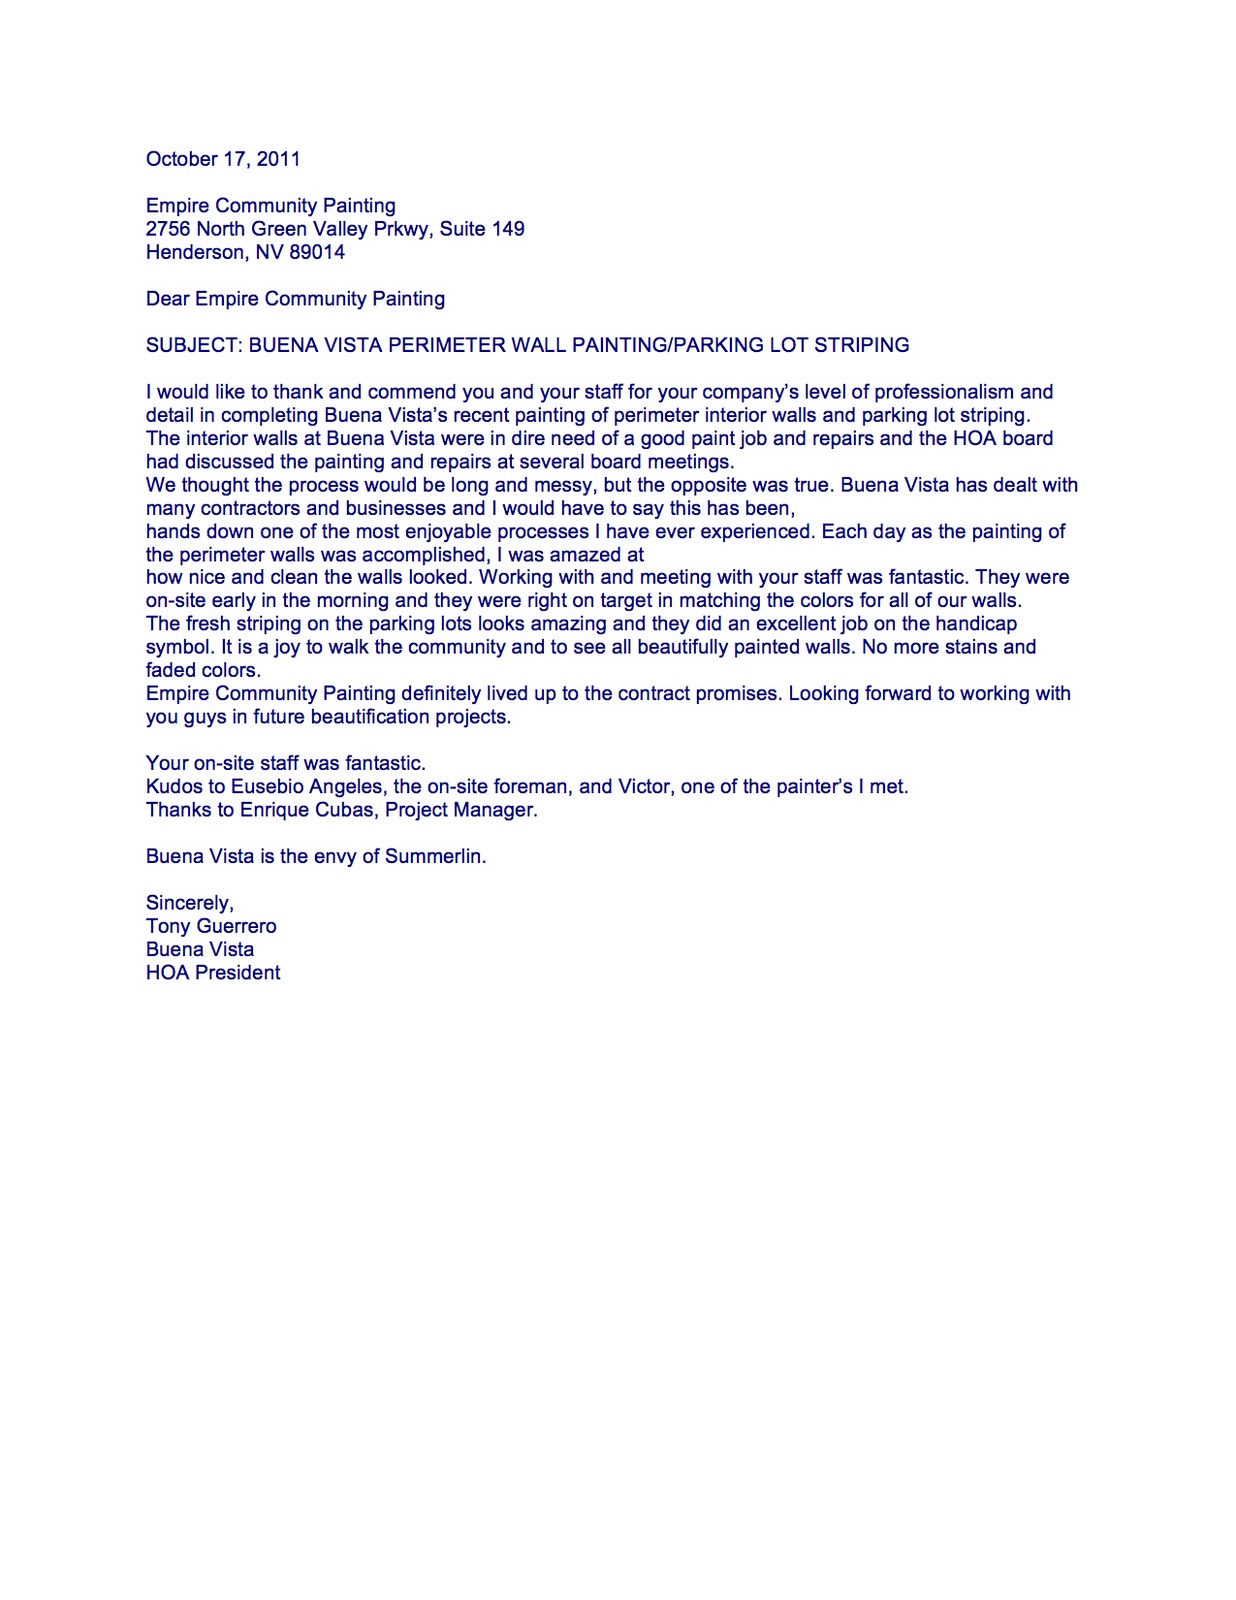 EmpireWorks Reviews and Resources: Buena Vista HOA Reference Letter